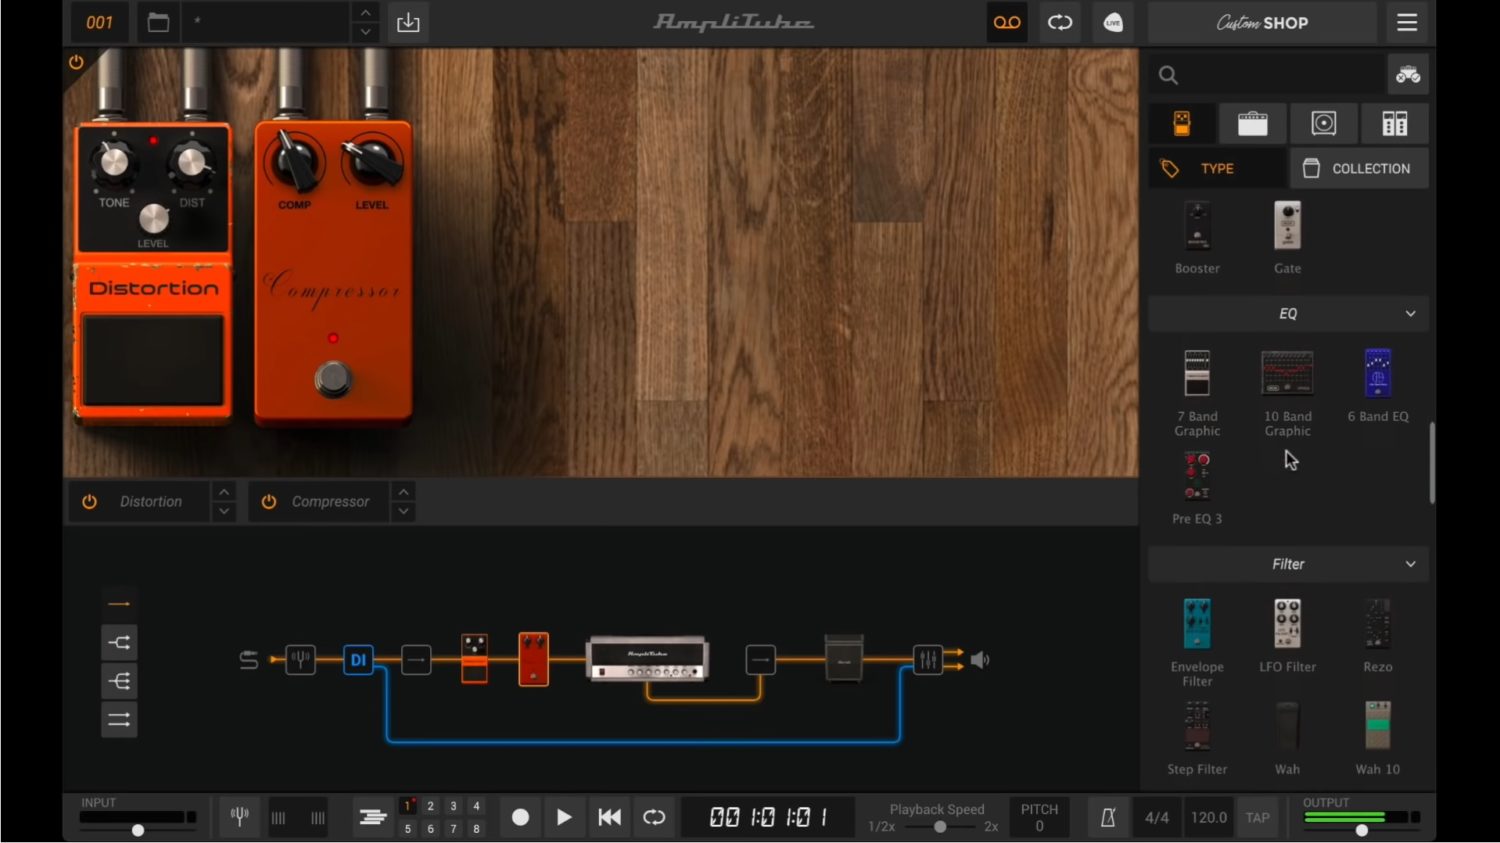 download the new version for windows AmpliTube 5.7.0